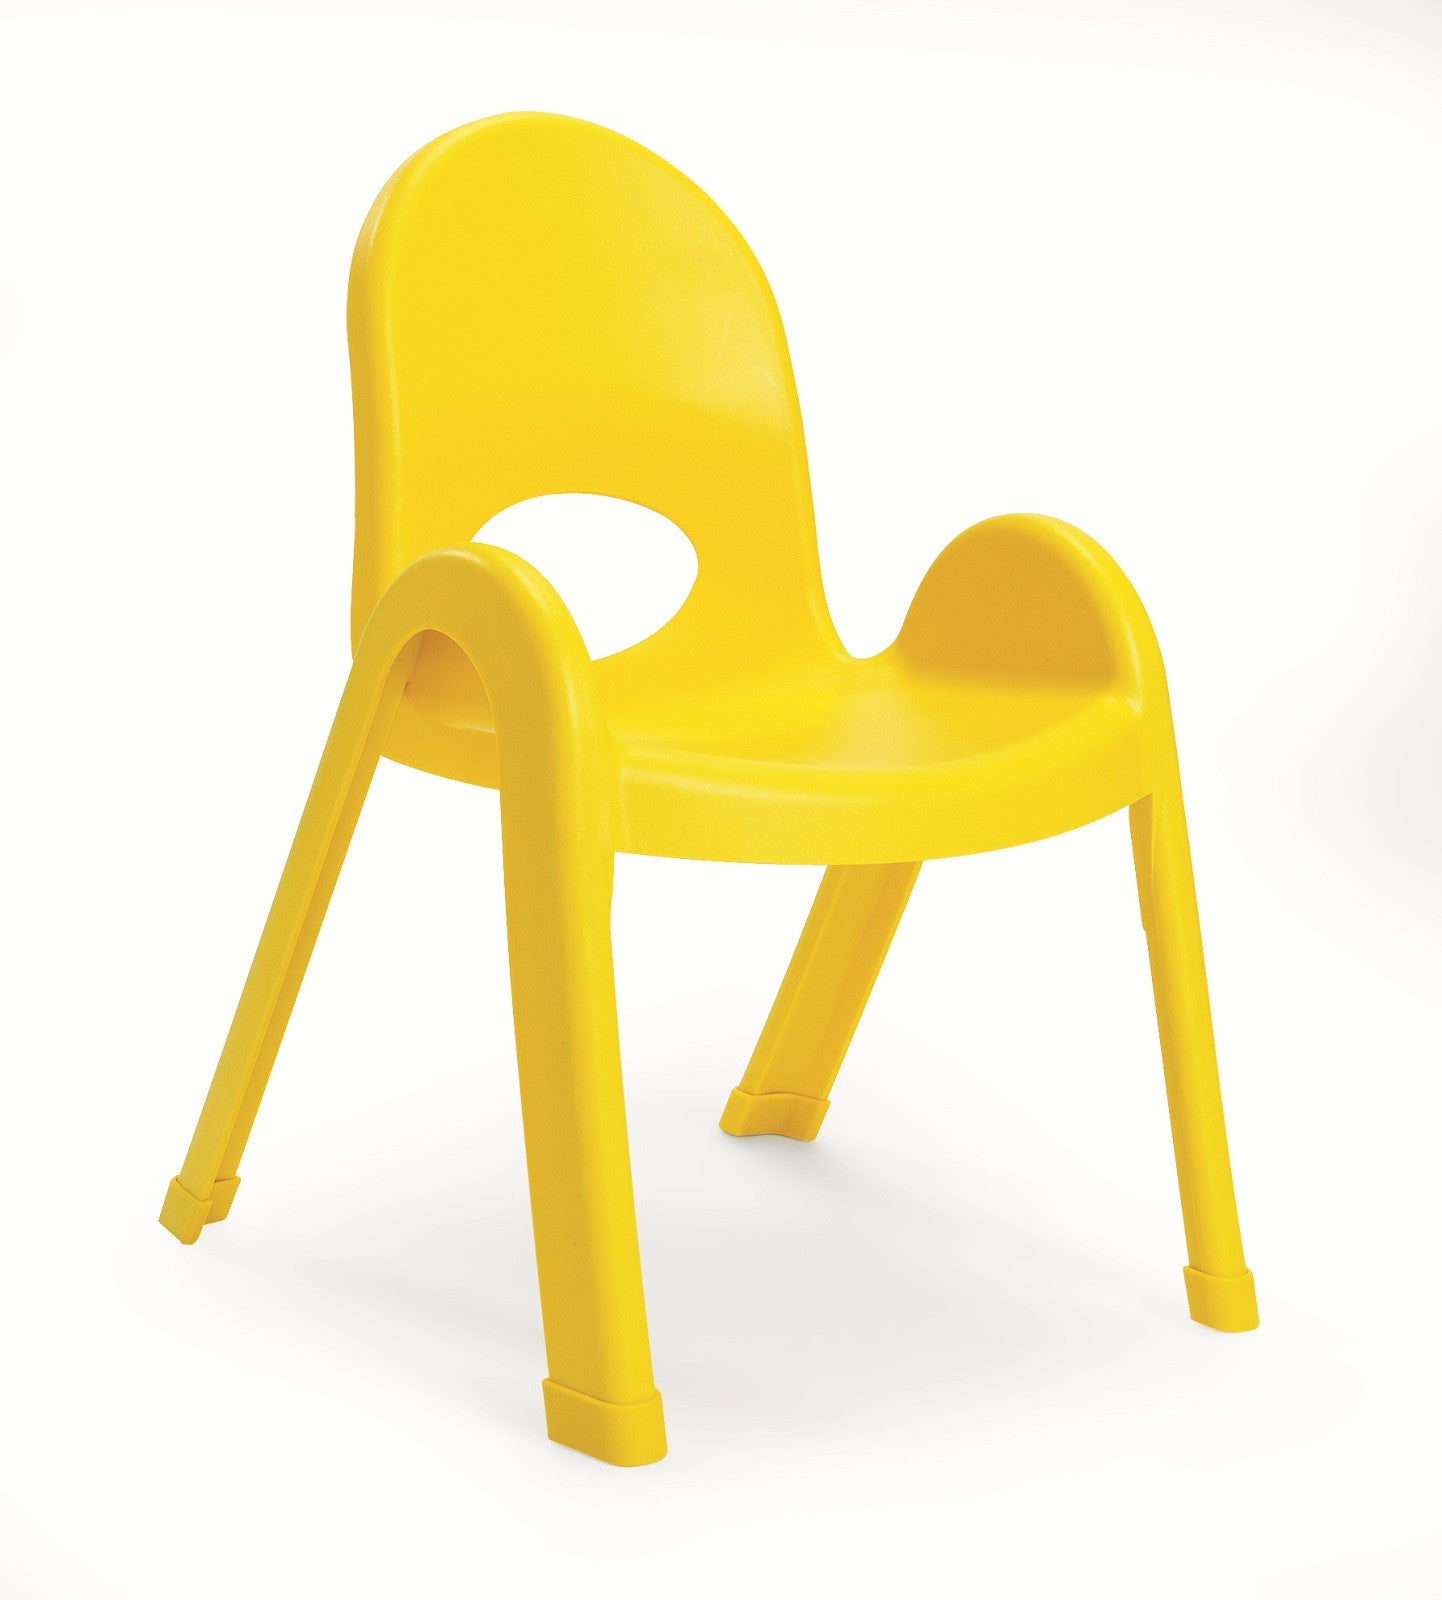 Value Stack Chair - 33 cm - Pack of 6 | Hopscotch School Supply